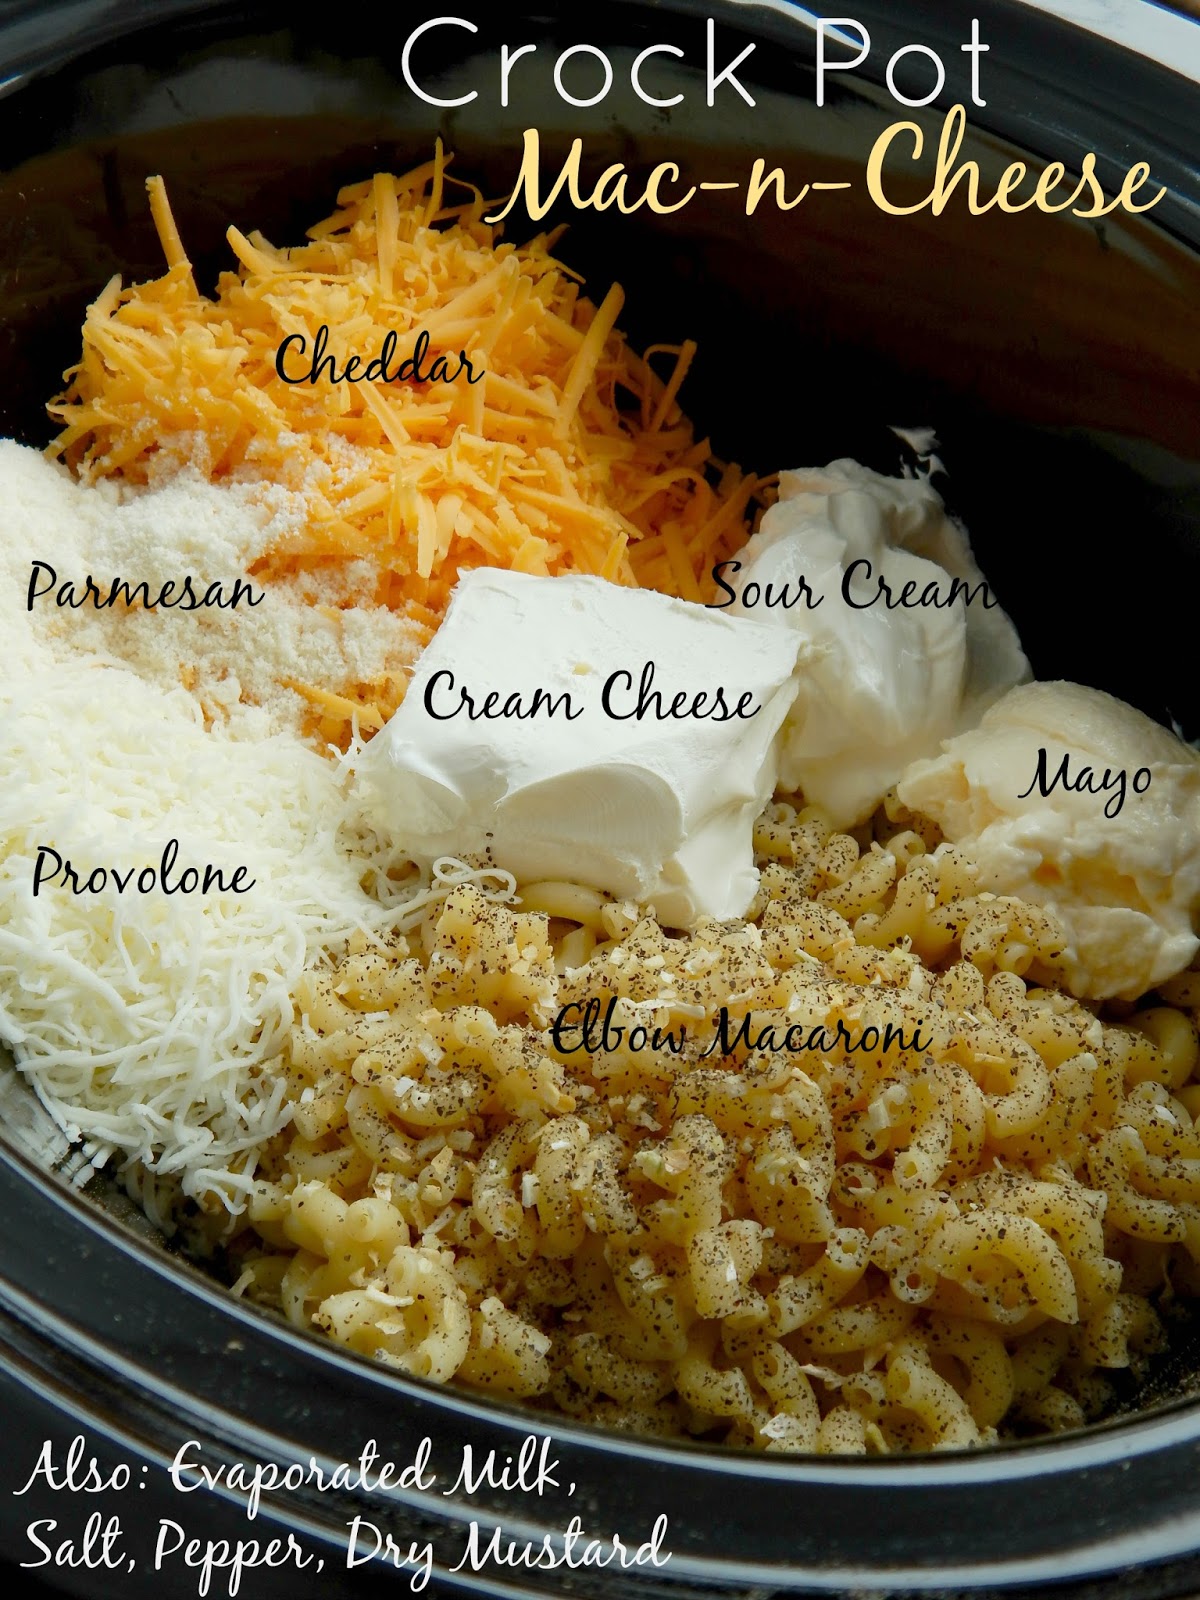 Tips for the Slow Cooker Mac and Cheese: